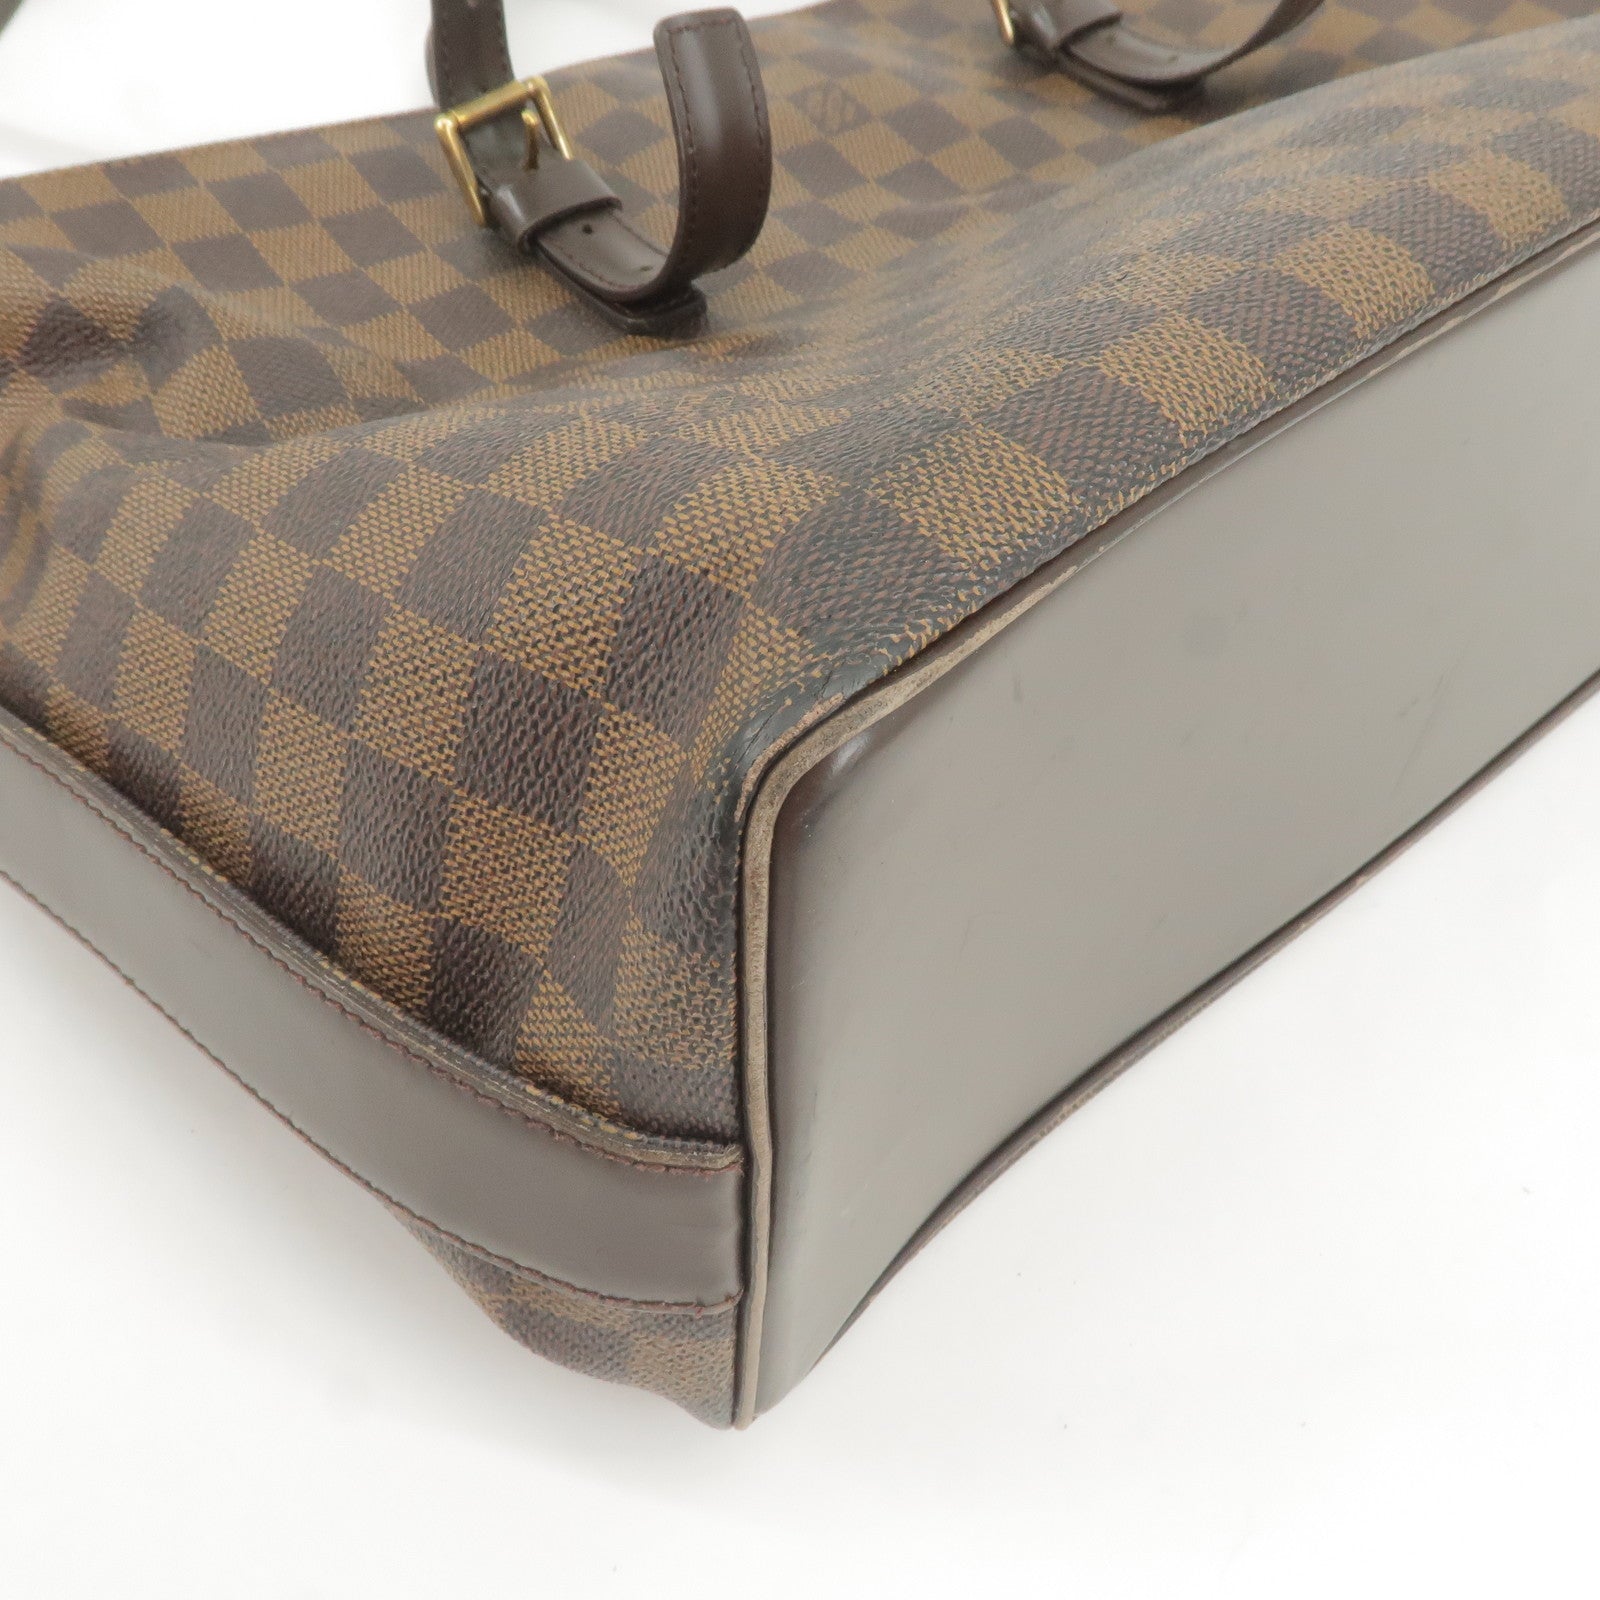 Louis Vuitton 2002 Pre-owned Cabas Piano Tote Bag